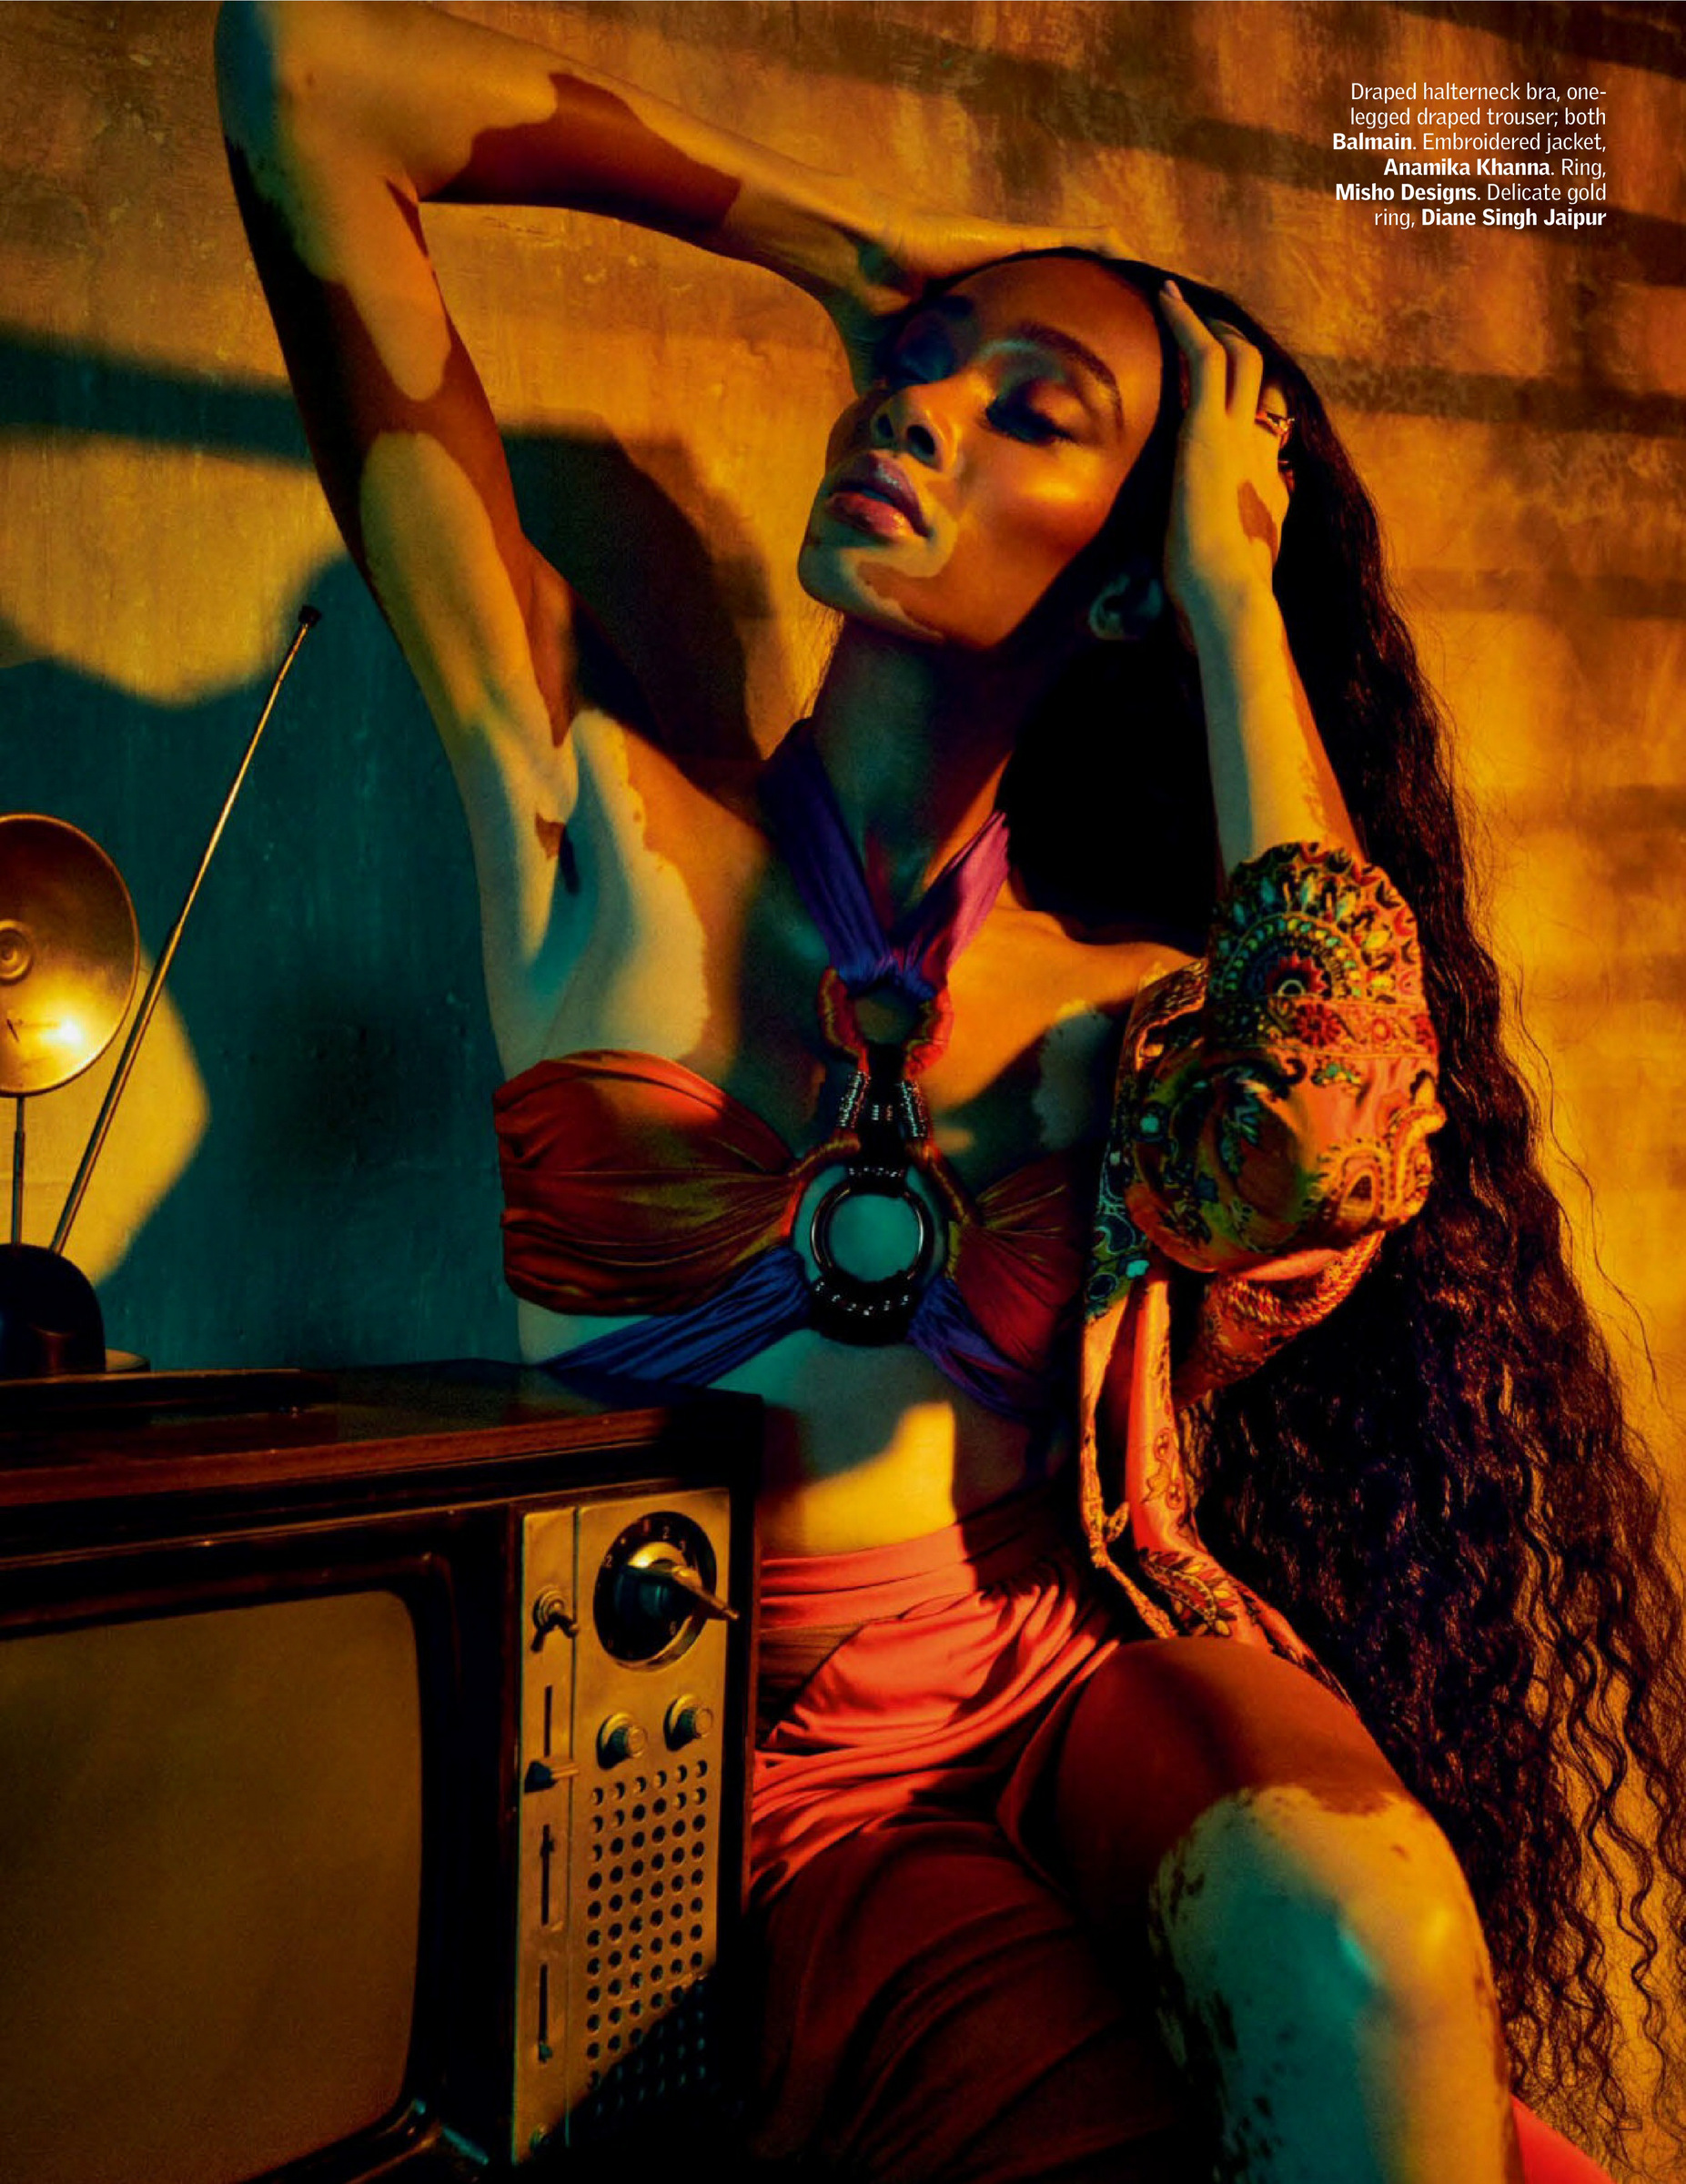 Photos n°1 : Winnie Harlow for Vogue India